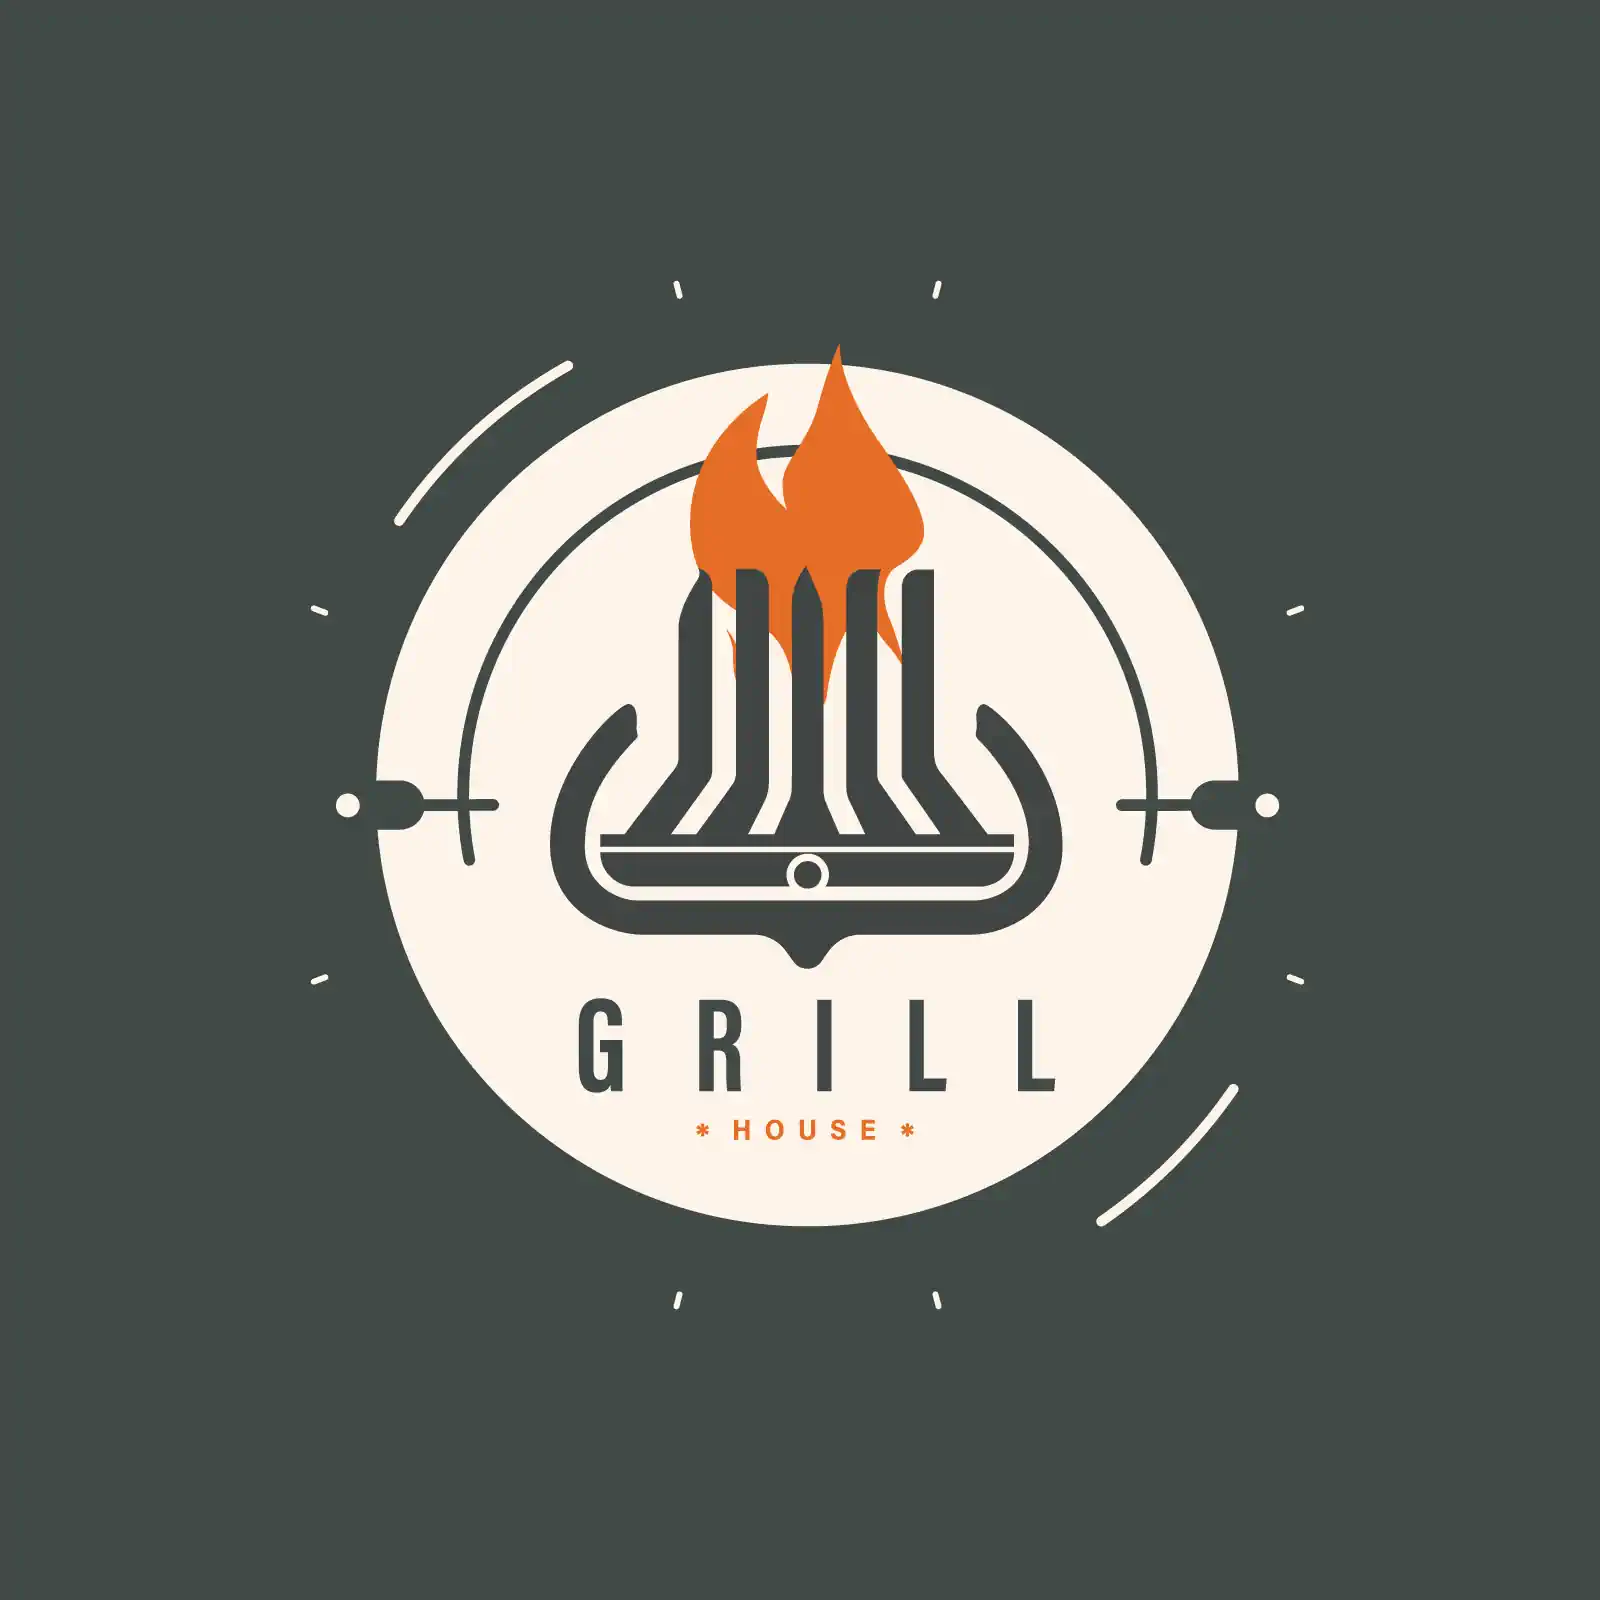 Grill house logo